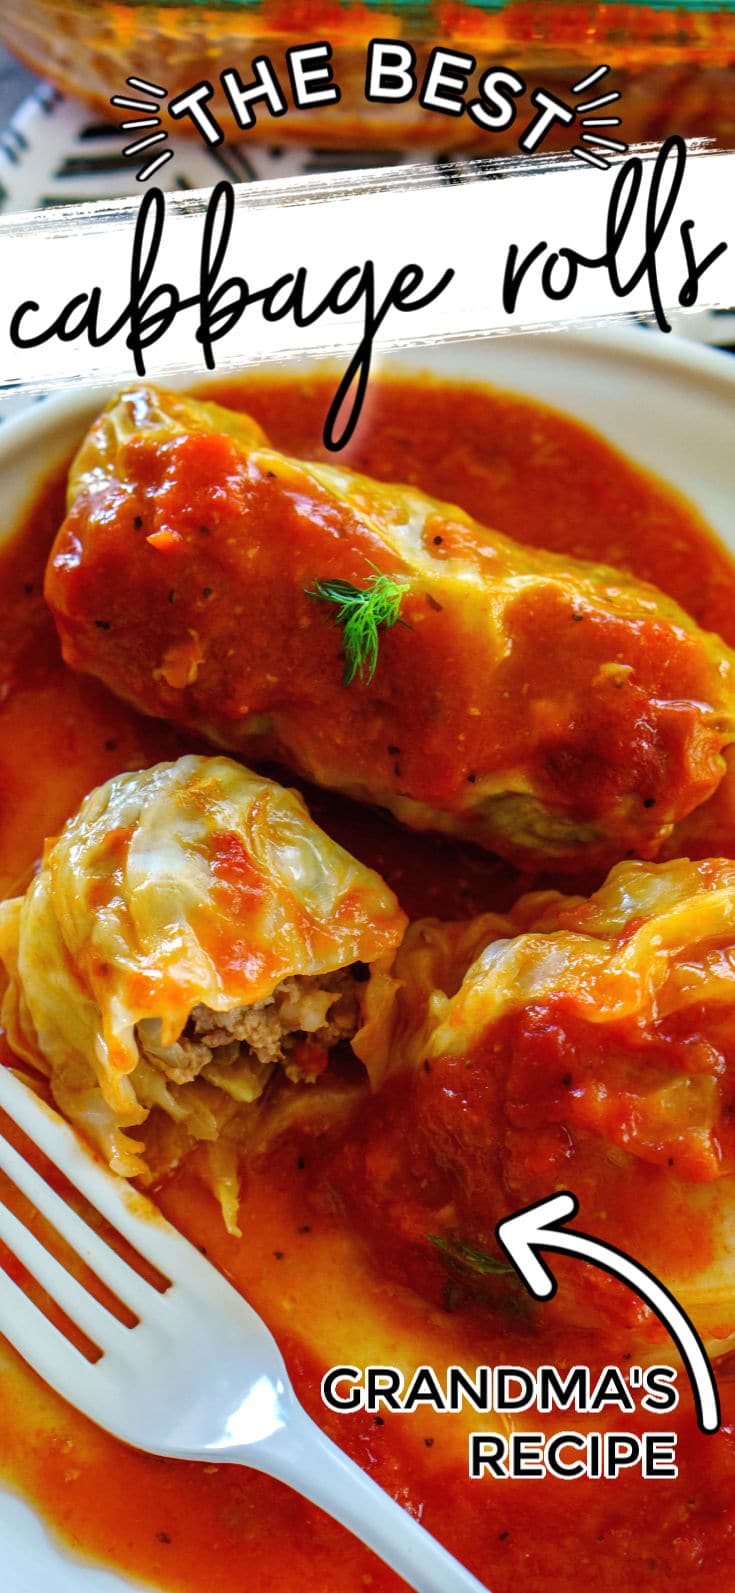 Golumpki or Gołąbki are Polish cabbage rolls that are stuffed with a mixture of beef, pork, rice, and seasoning. This recipe serves 12 and costs just $11.32 to make or $0.95 per serving!  via @foodfolksandfun